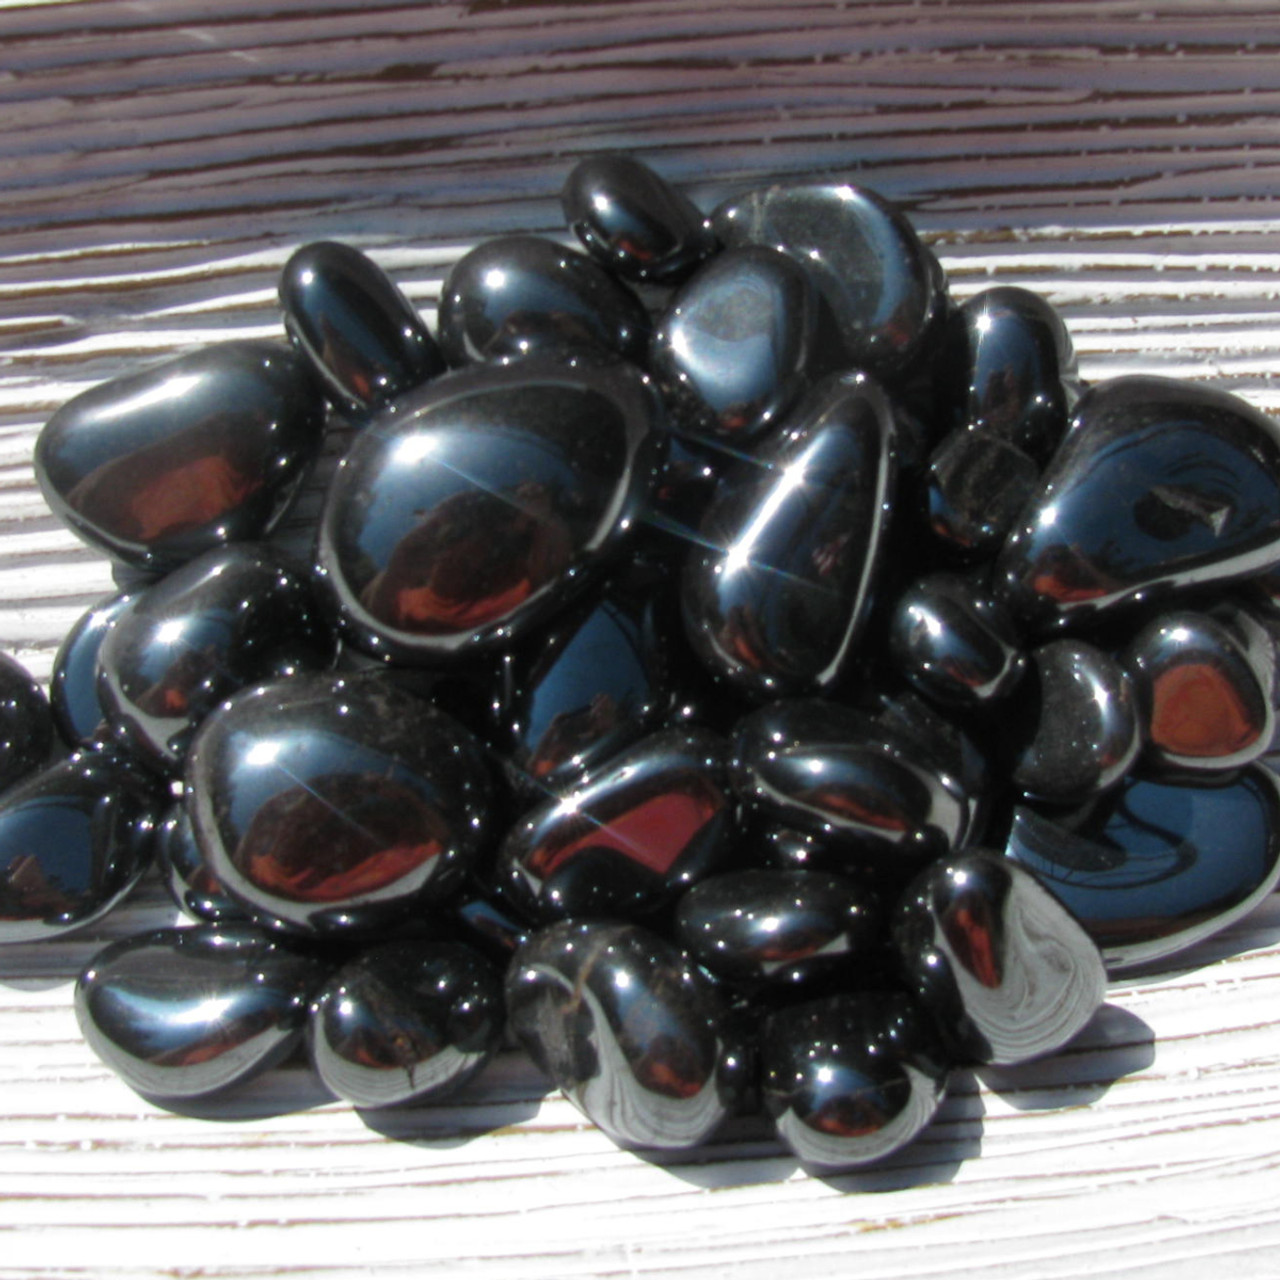 Hematite Tumbled Stone, Ethical Crystals, Ascension Jewelry and Energy  Tools